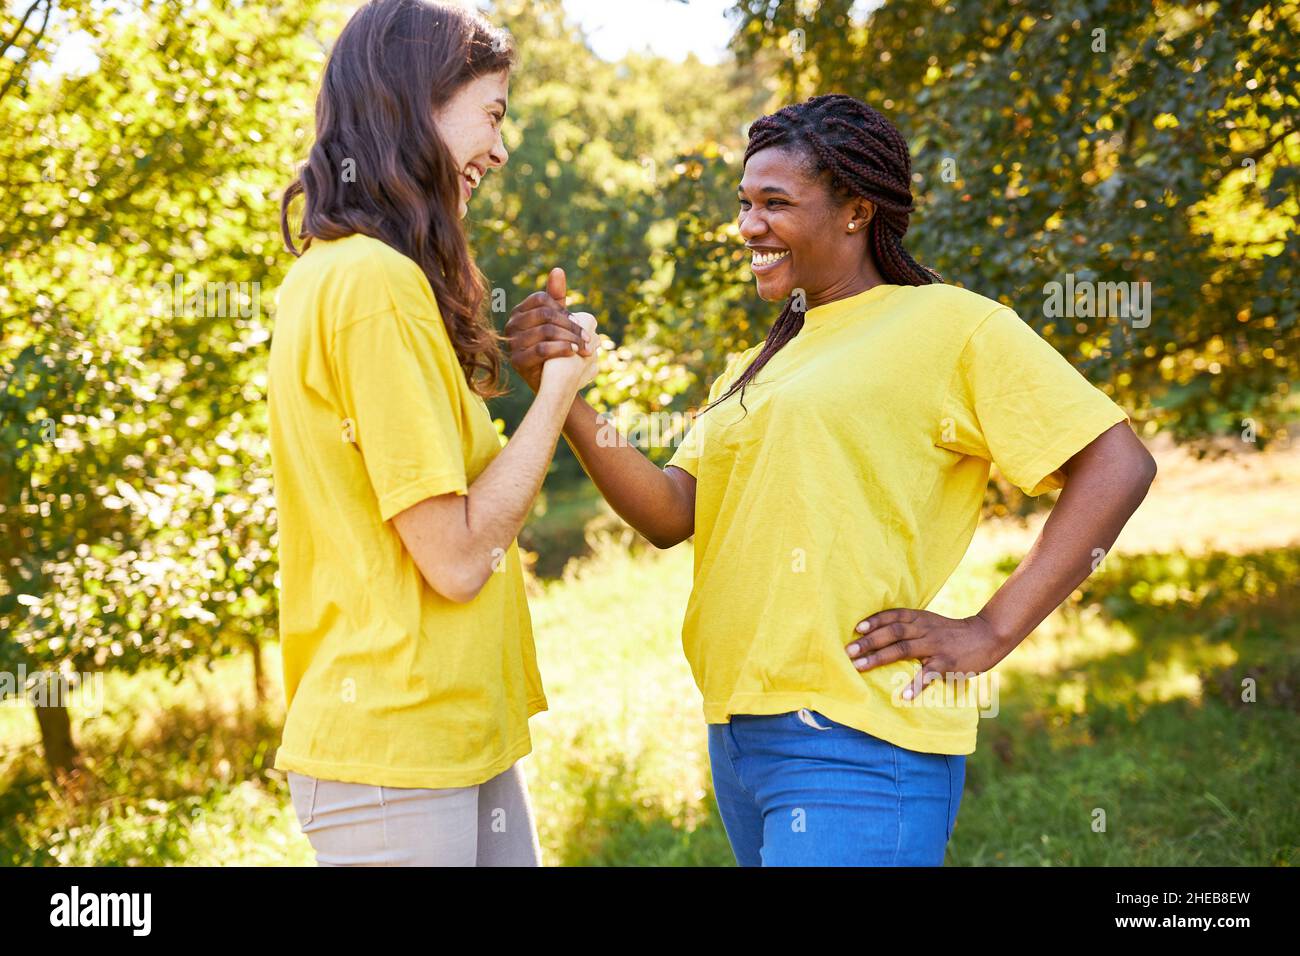 Two girlfriends at a sports event during handshake for teamwork and greeting Stock Photo